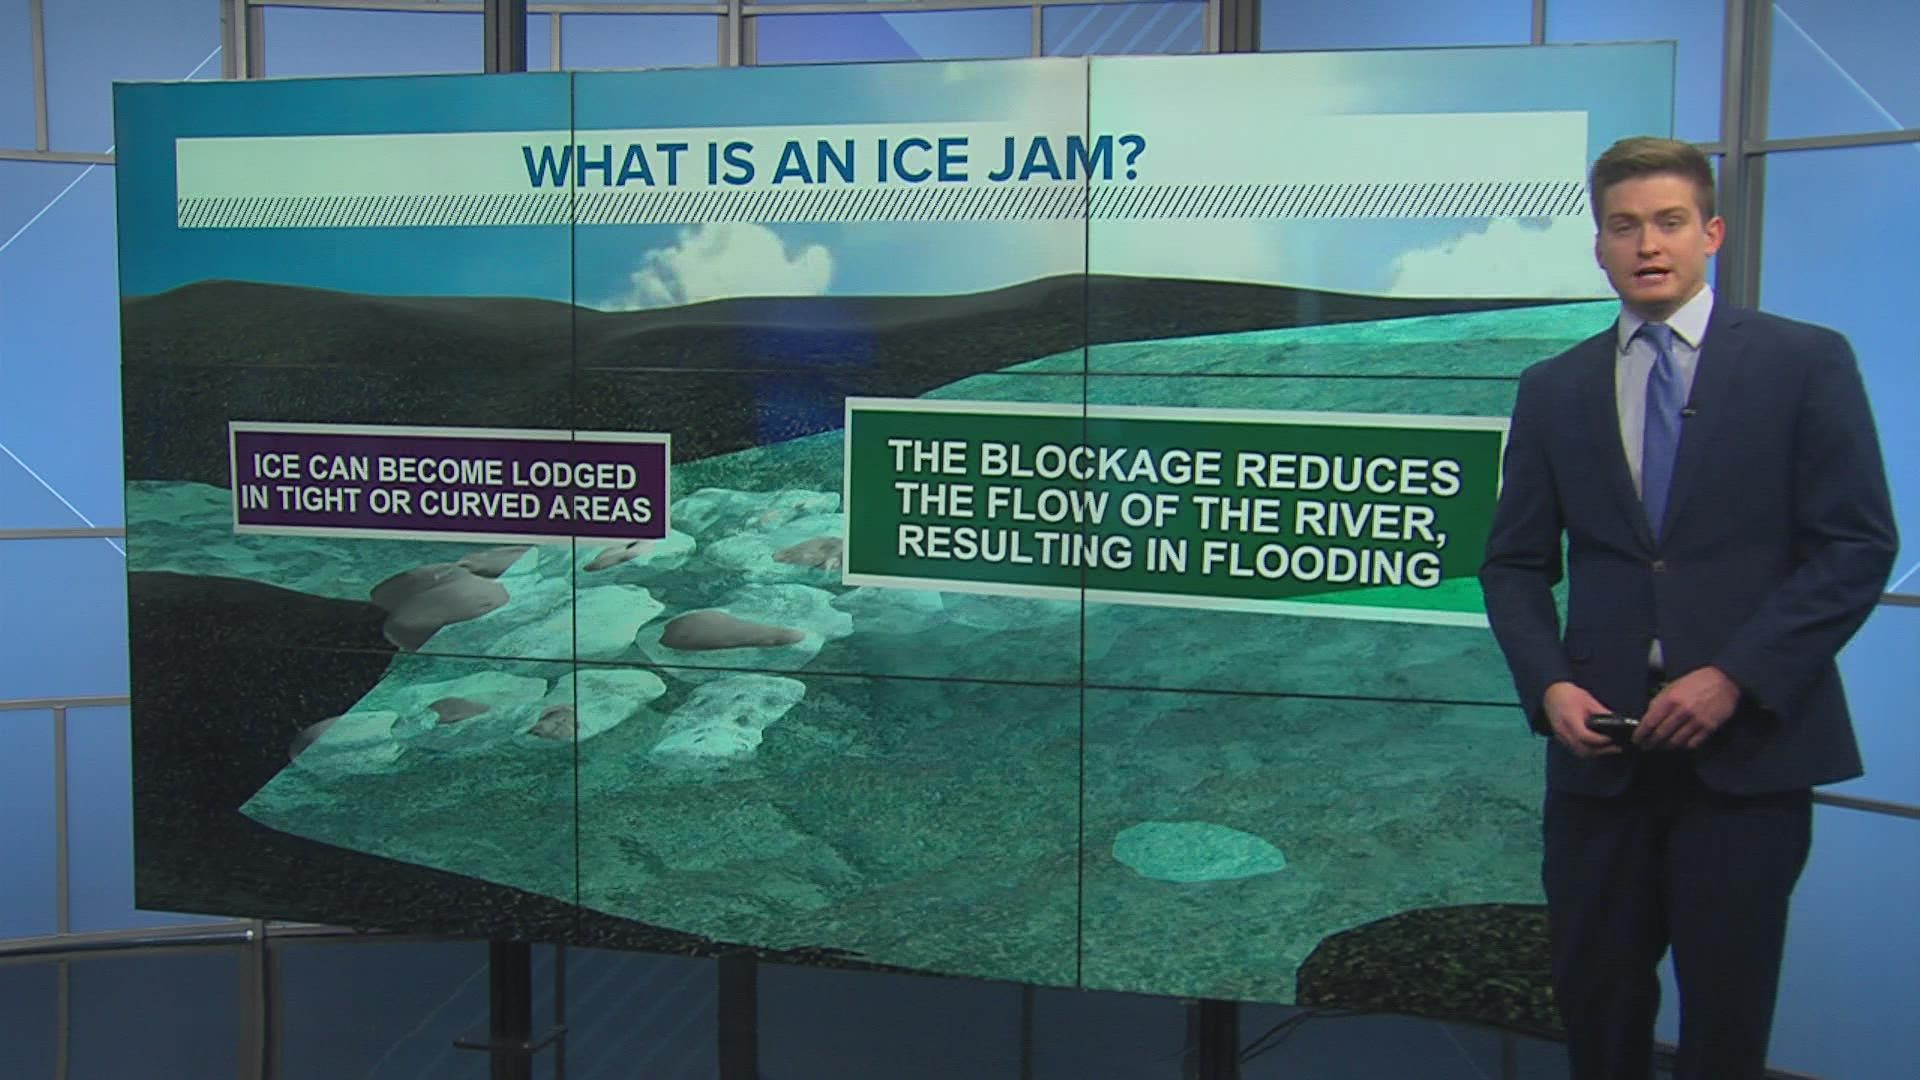 During the transition from winter to spring, ice jams can cause major flooding problems.